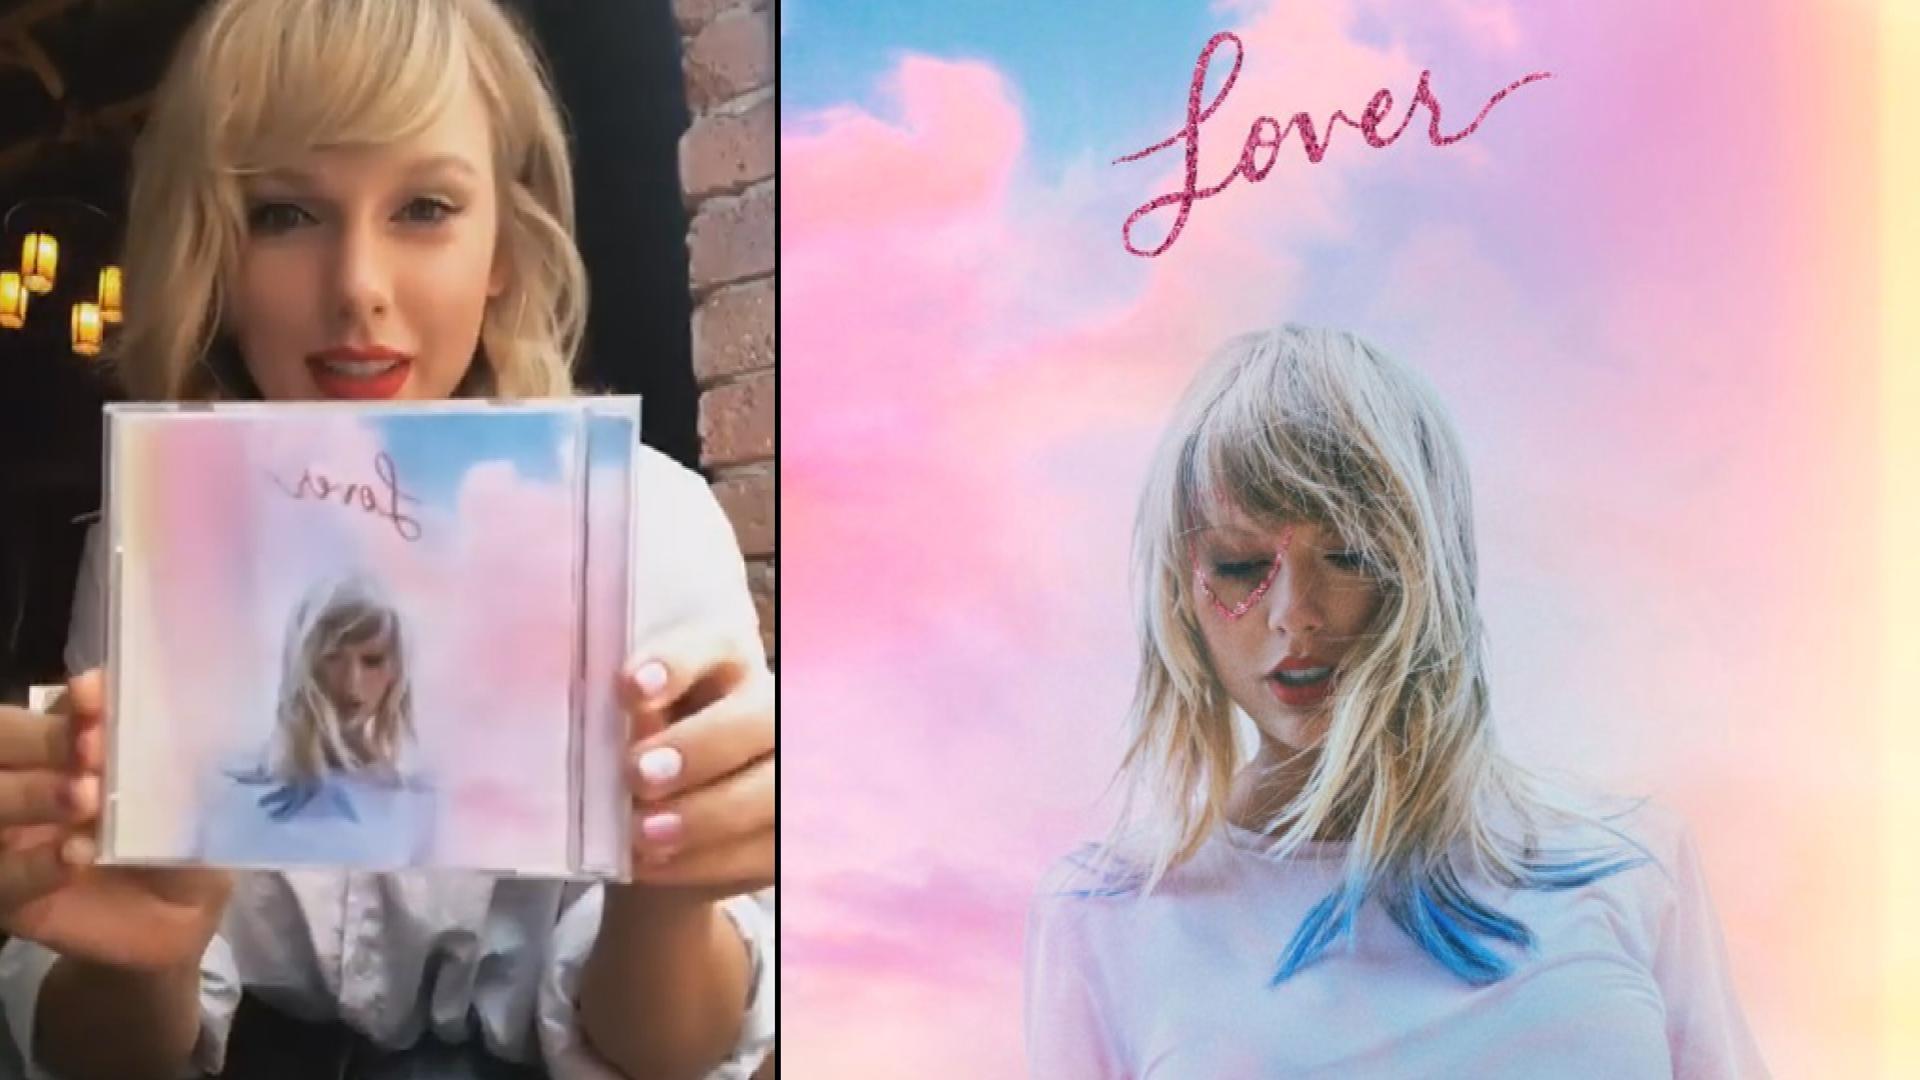 download taylor swift lover